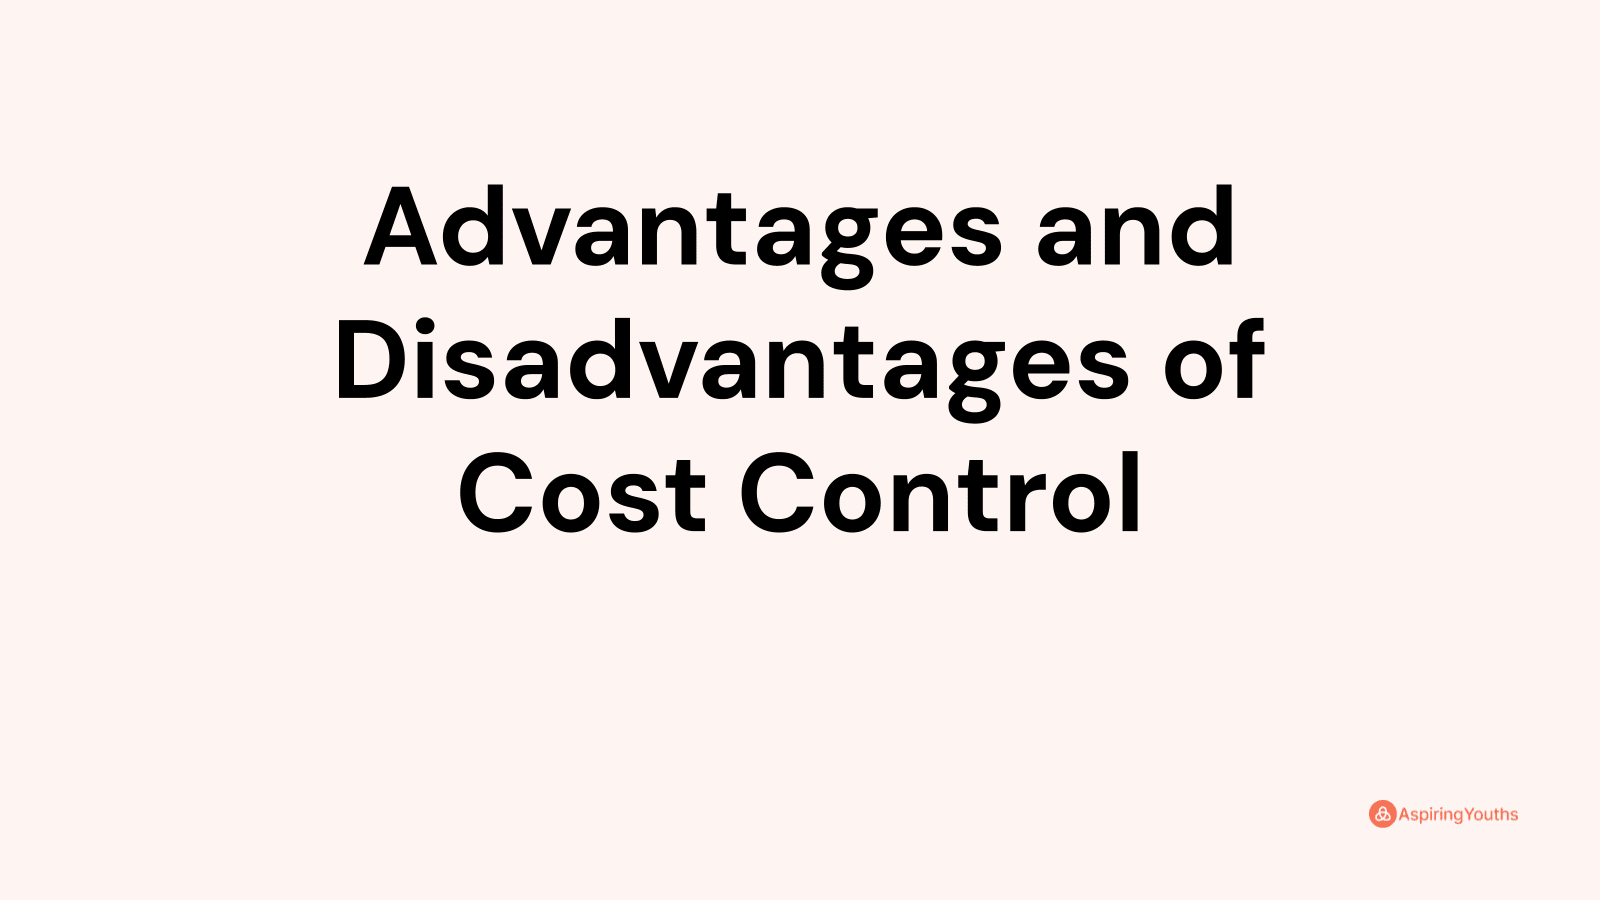 Advantages and disadvantages of Cost Control